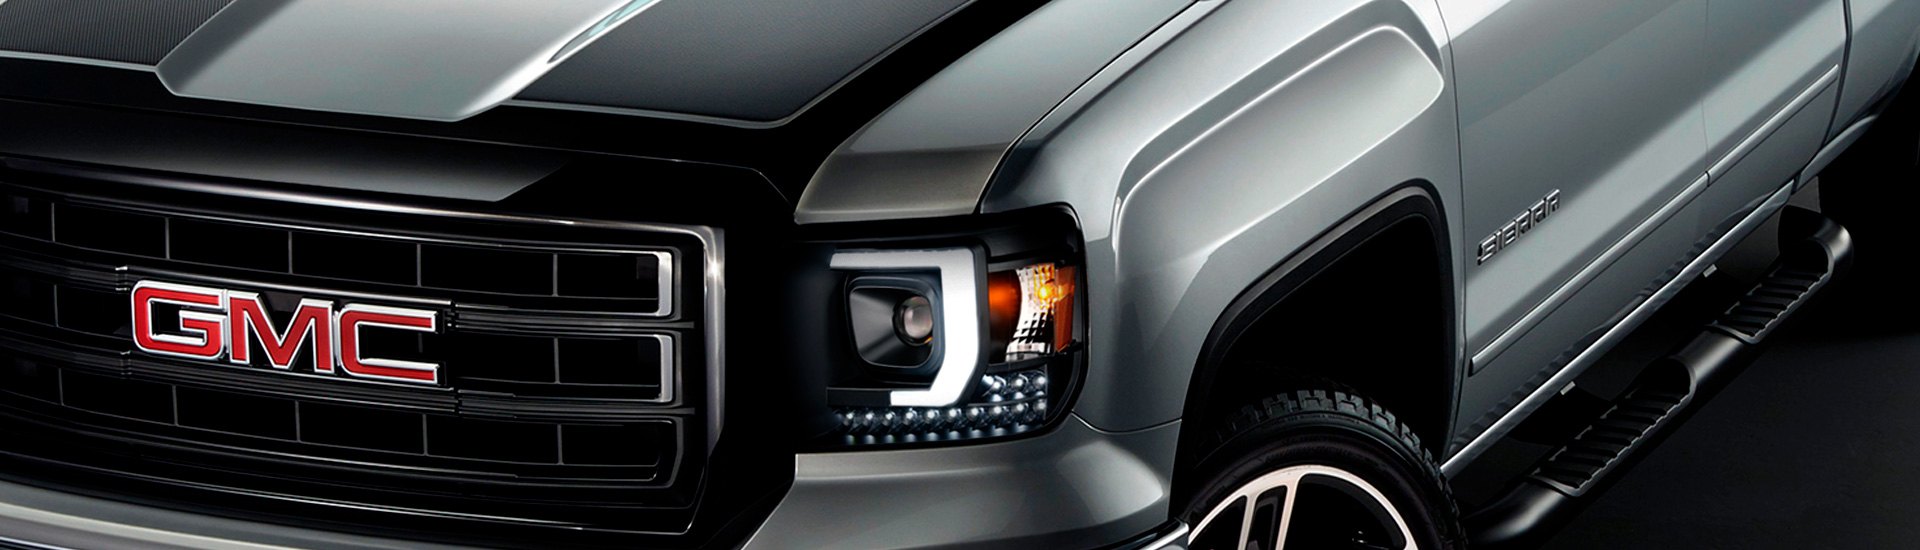 Just Released - New U-Bar Headlights with LEDs by Anzo For 2020 GMC Sierra